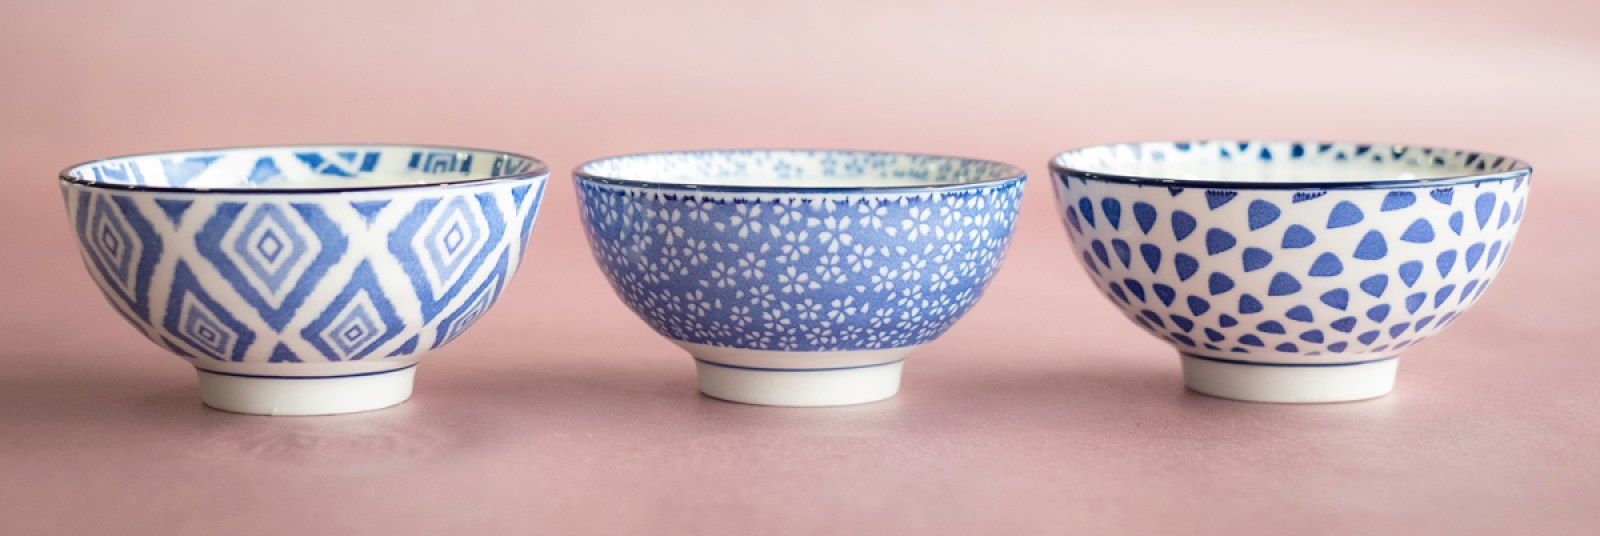 A row of three candles made in pretty, reusable blue-and-white bowls.